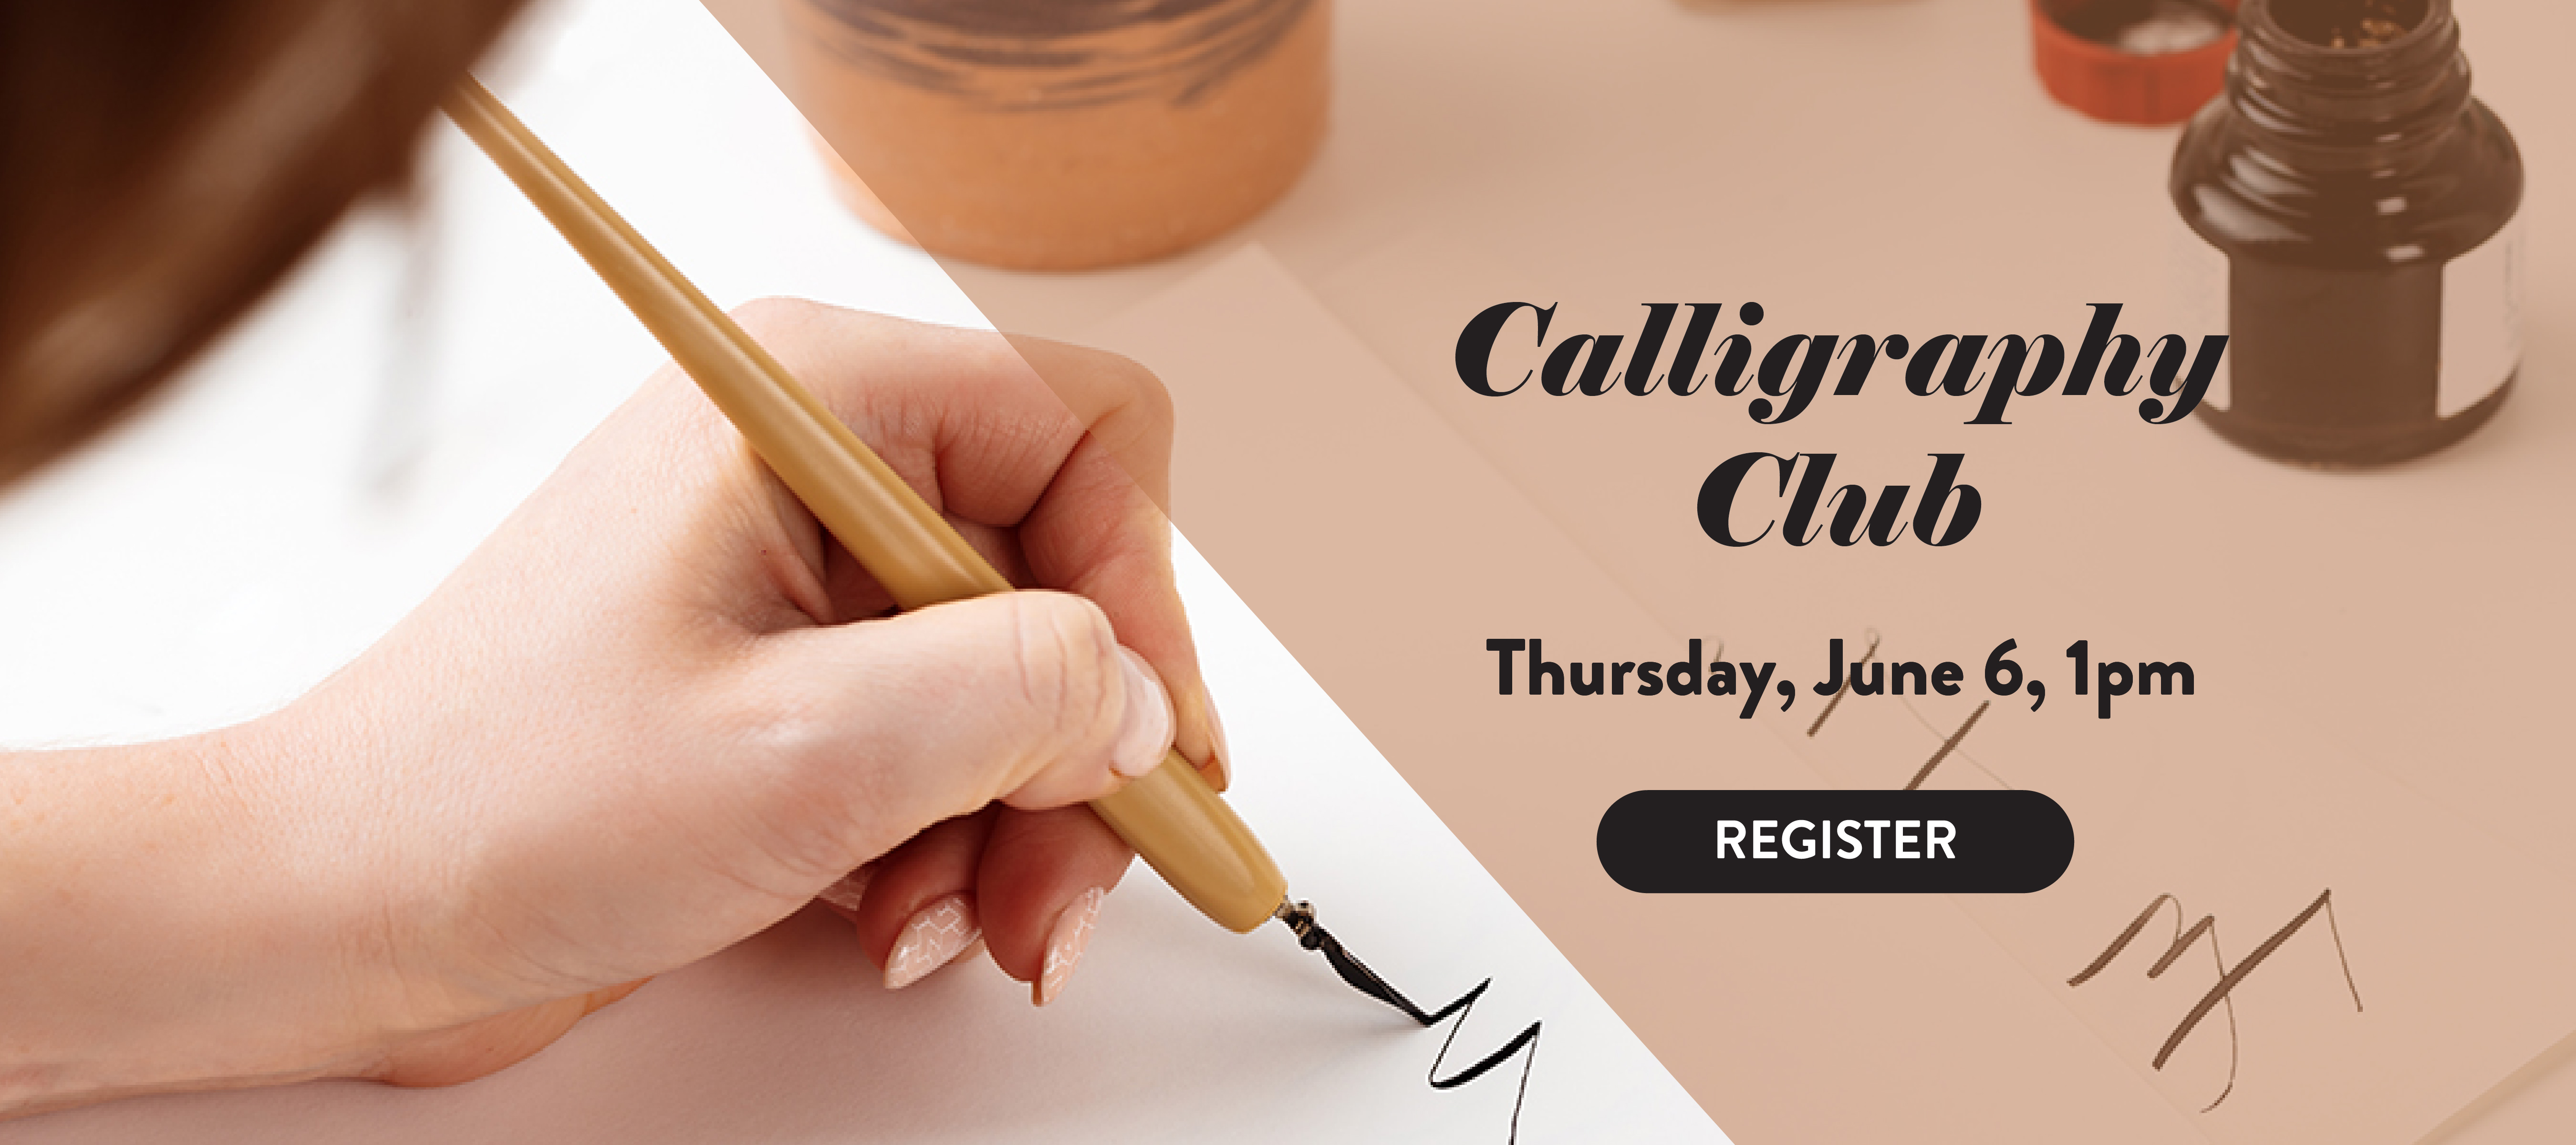 phpl, Prospect Heights Public Library, calligraphy club, learn, practice, brush strokes, writing, learn the basics, practice your skills, Adult